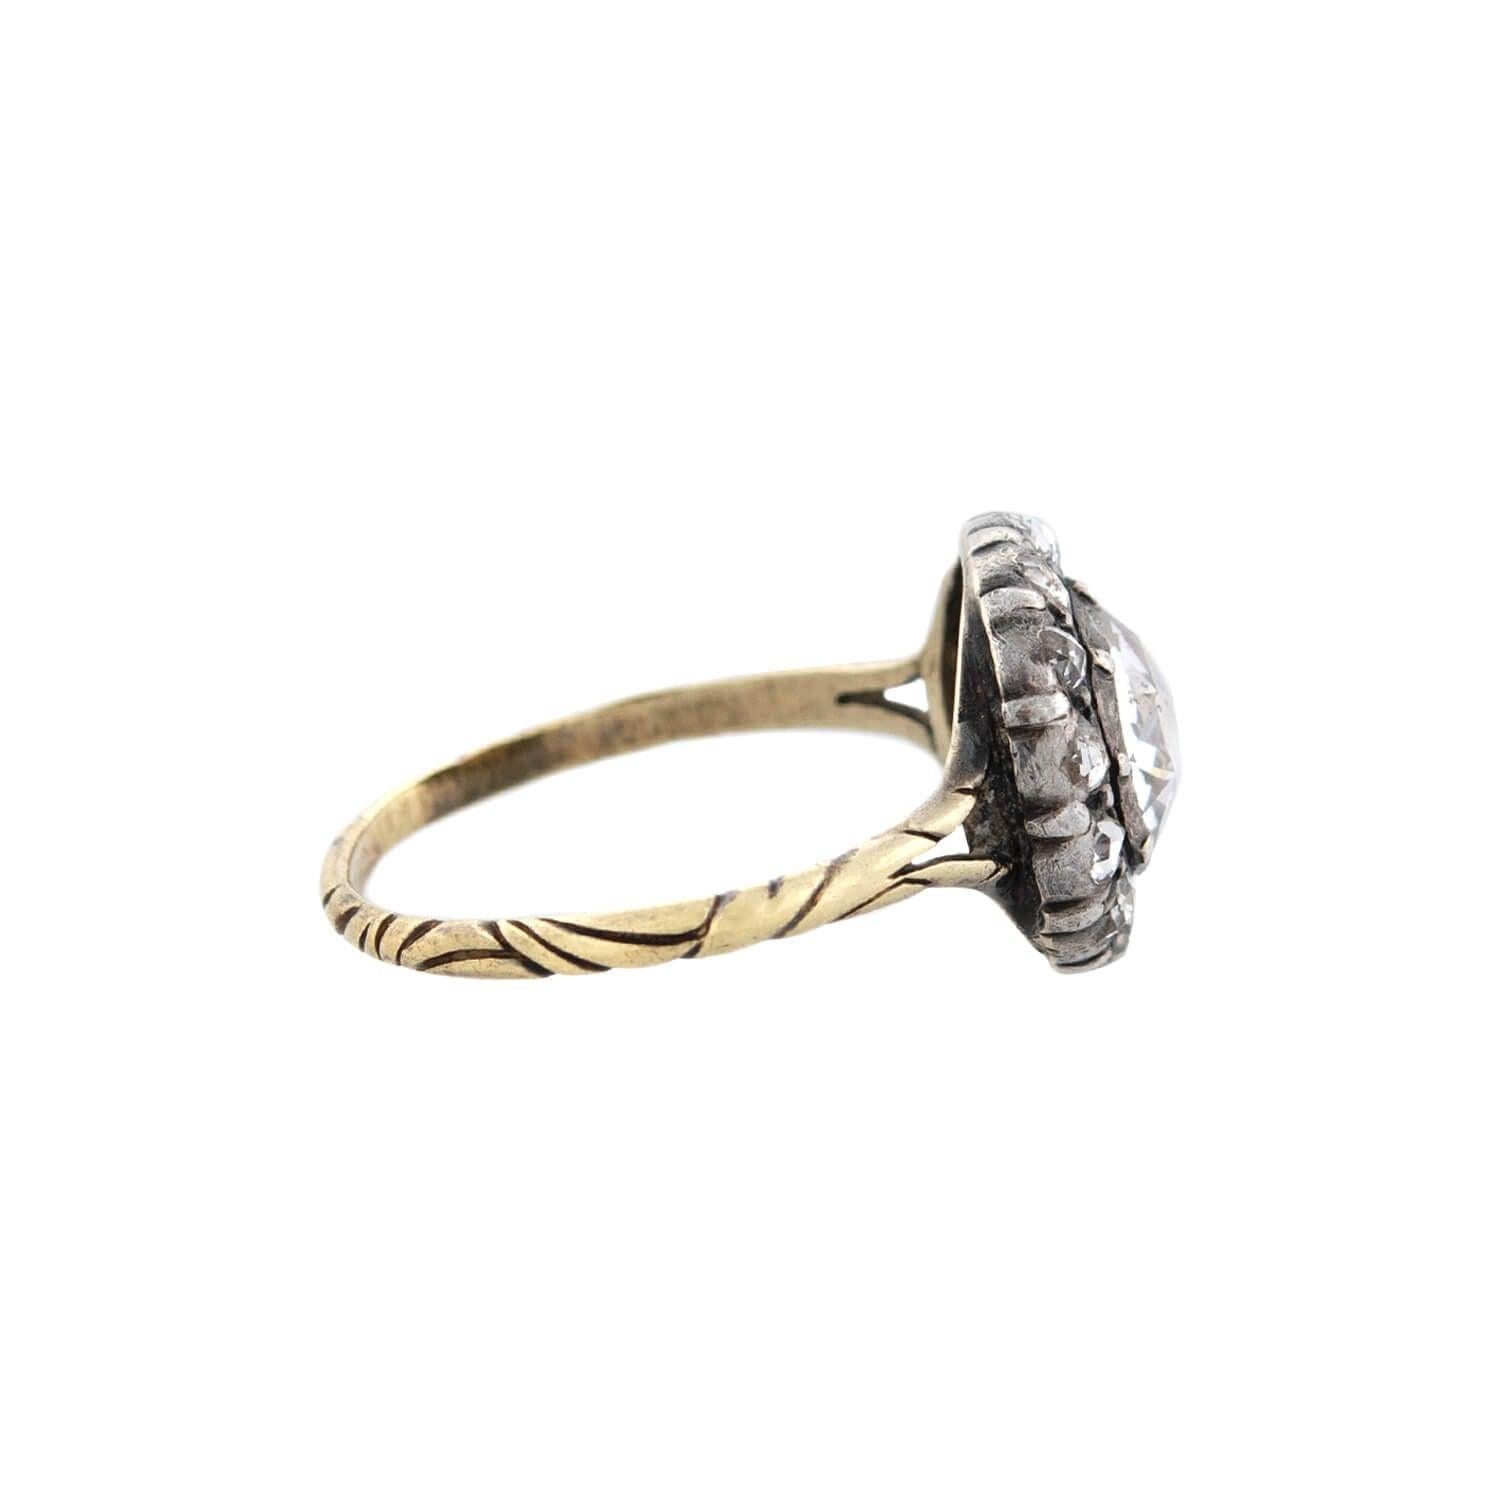 A stunning ring from the Georgian (ca1790s) era! Crafted in 15kt yellow gold and topped in sterling silver, this breathtaking ring adorns a 1.15ctw Rose Cut diamond at its center. The foil-backed stone is held within a lovely collet setting, and it